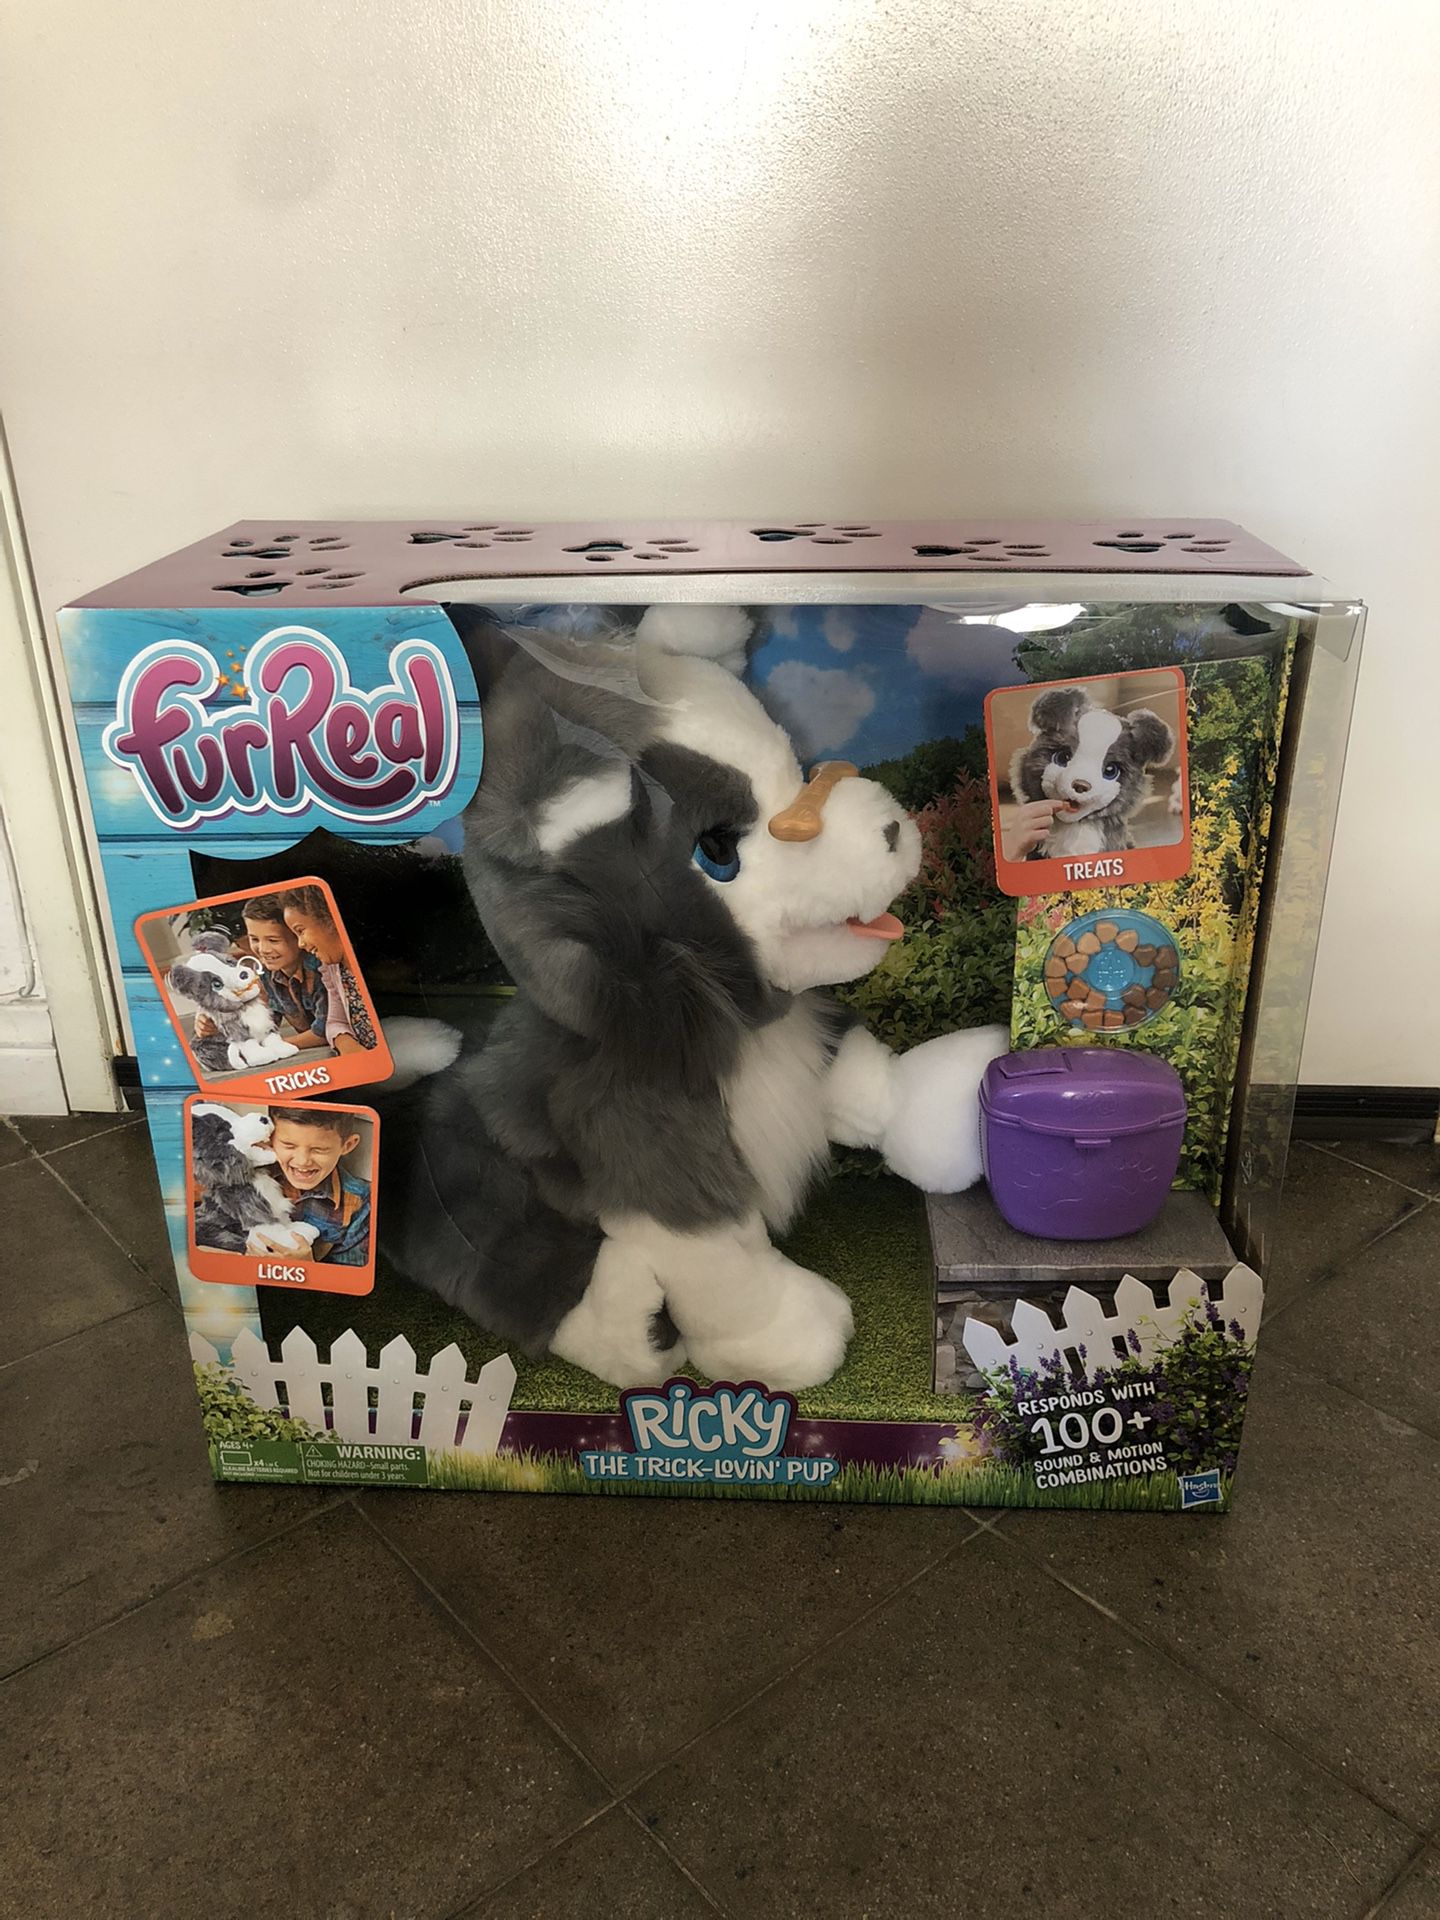 FurReal Friends Ricky animated stuffed dog toy